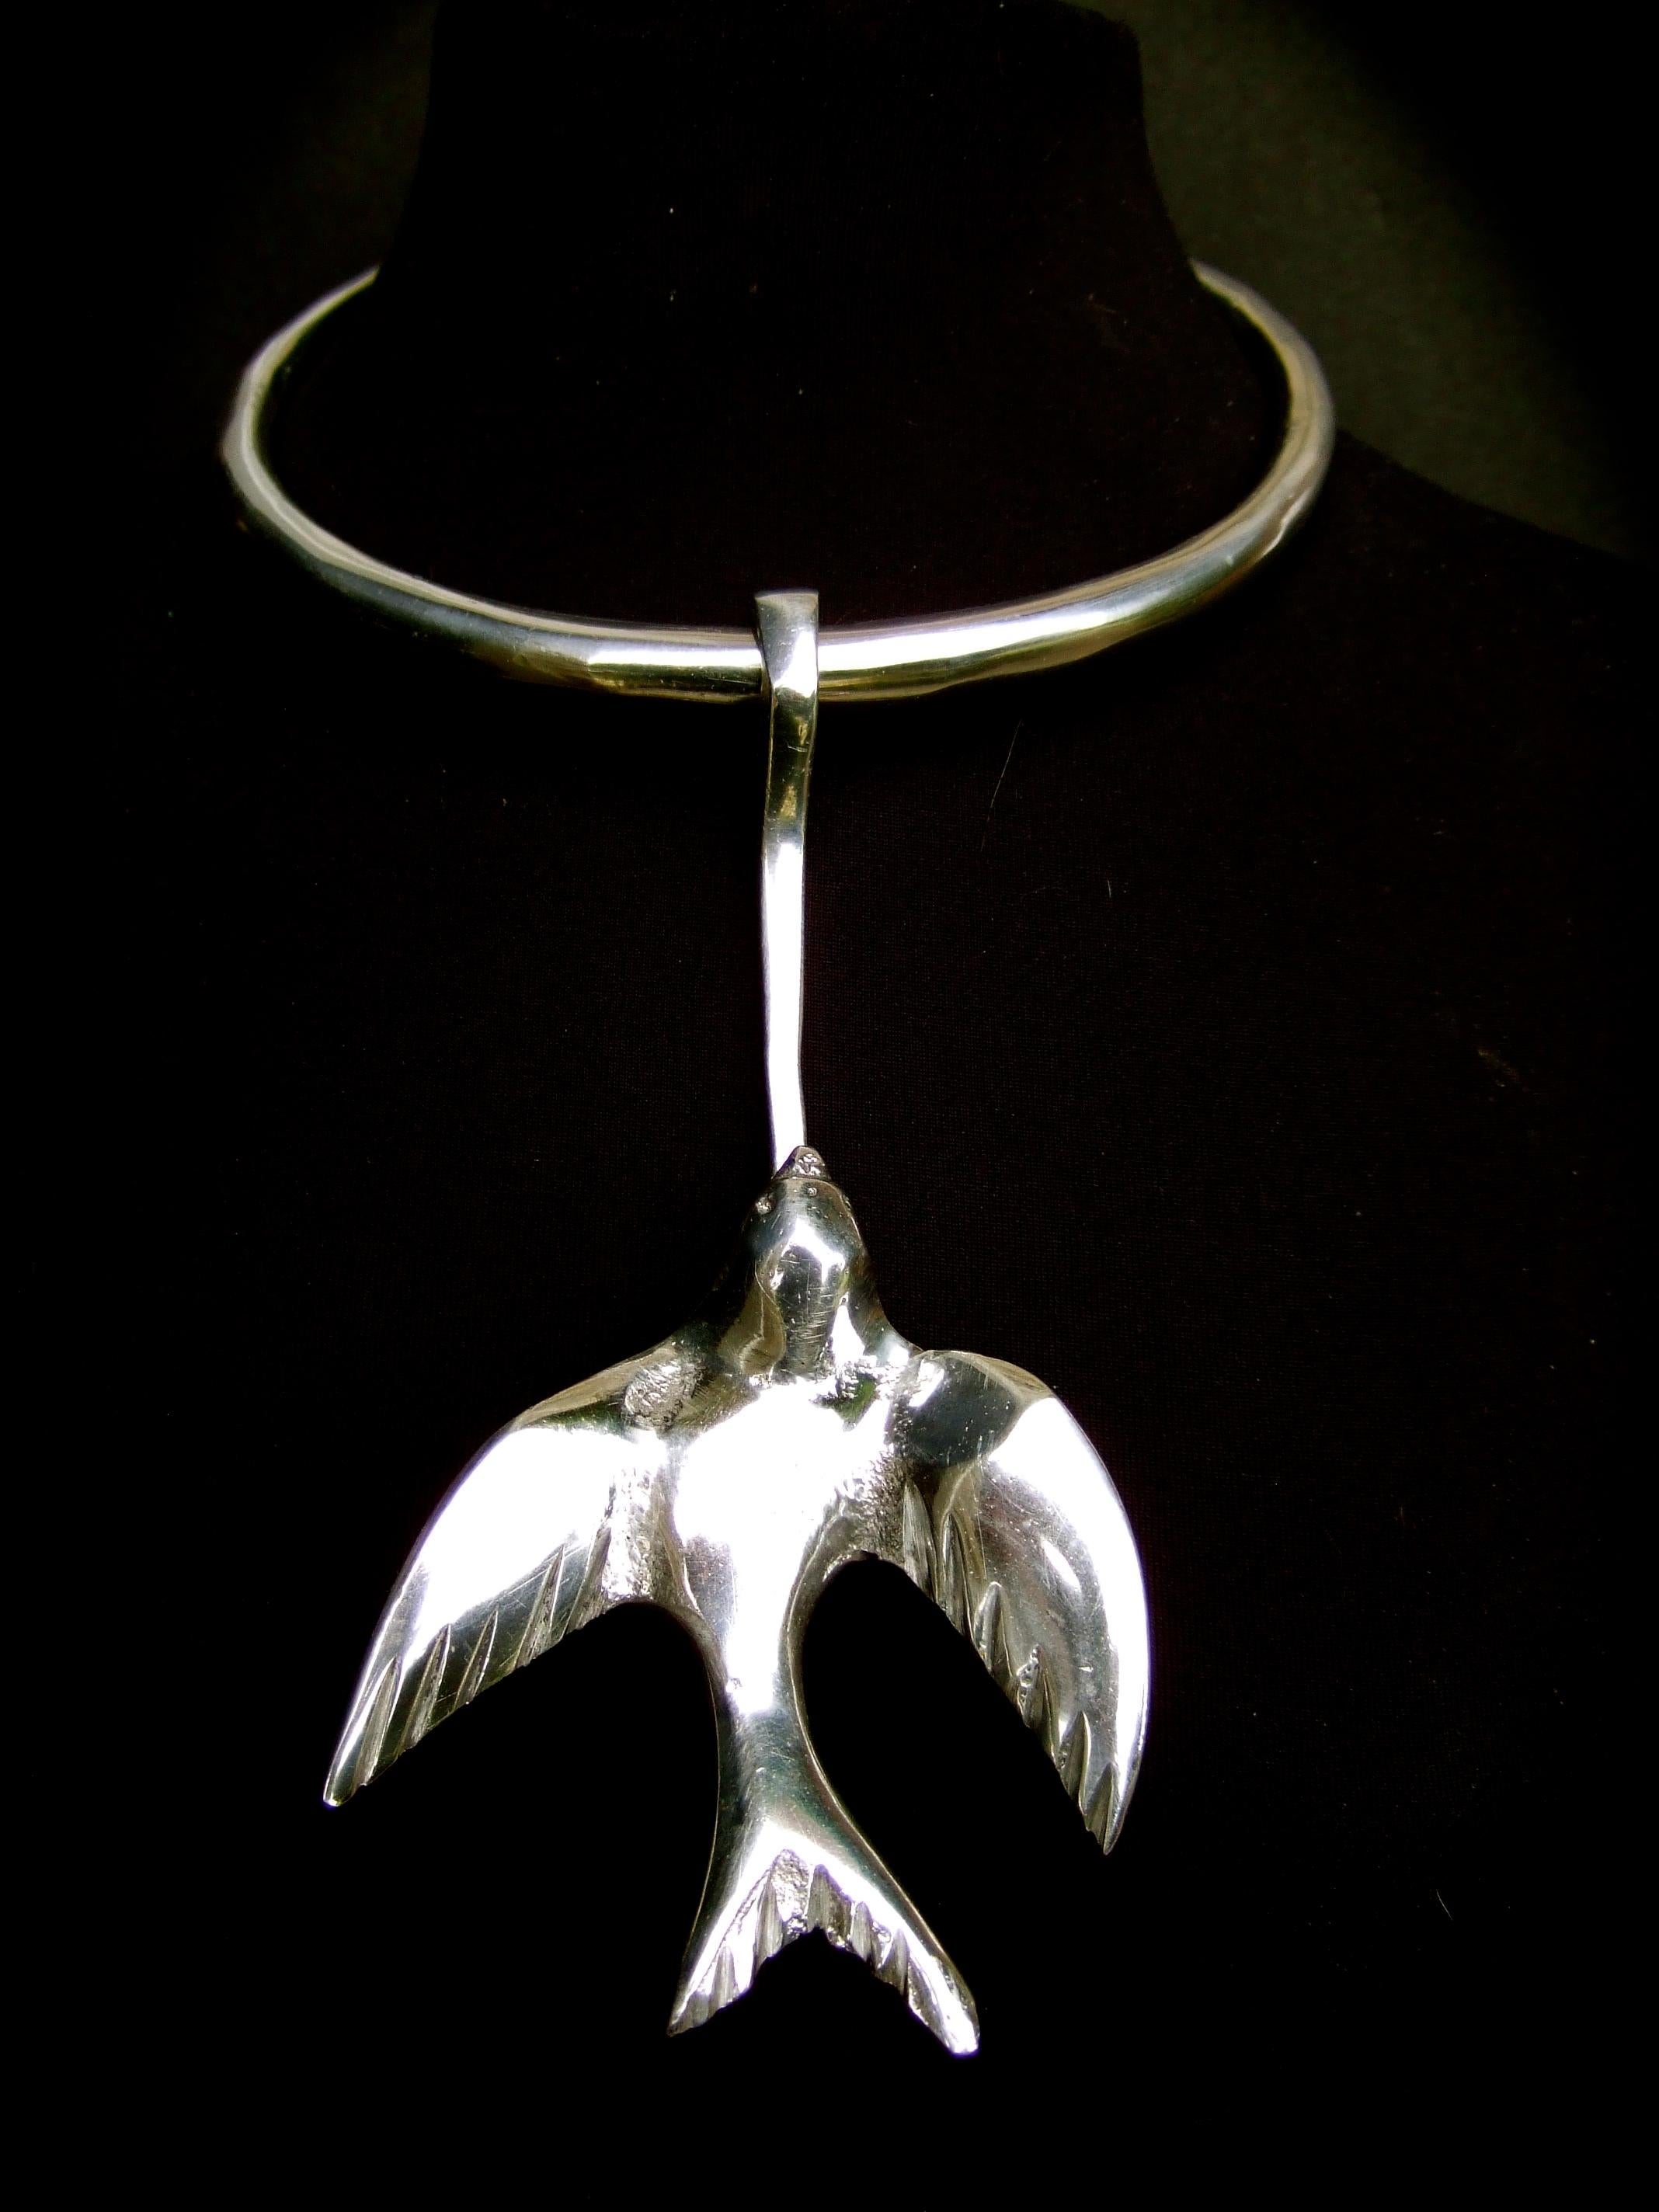 Massive avant-garde silver plated metal bird design articulated choker necklace c 1970s 
The unique artisan choker is designed with a rigid silver plated metal band
Adorned with a large silver plated articulated soaring bird figure

Makes a very